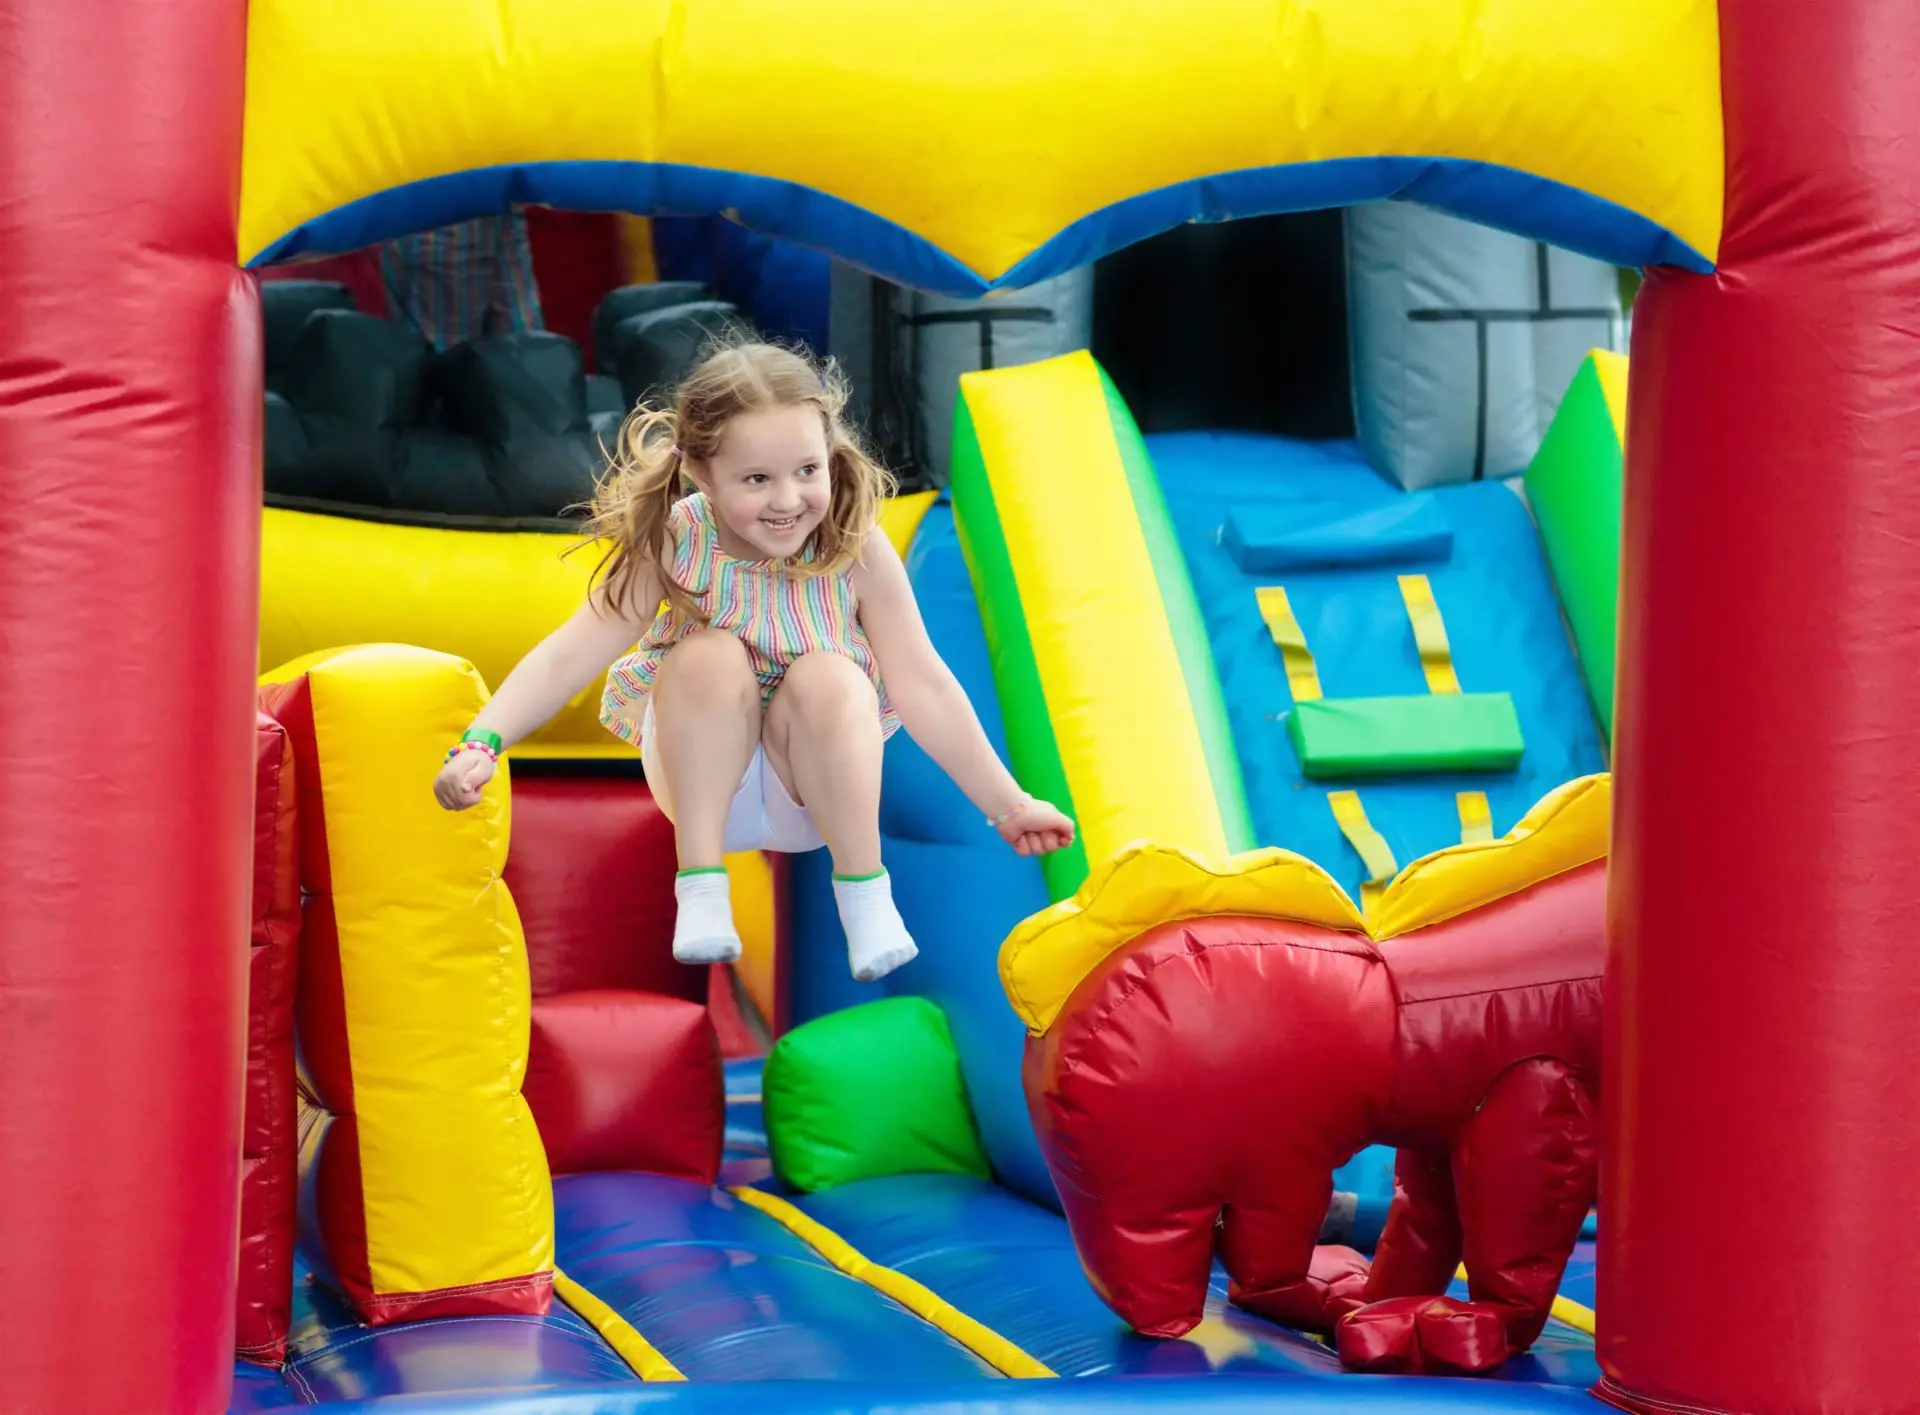 How to Make Money With Inflatable Obstacle Course